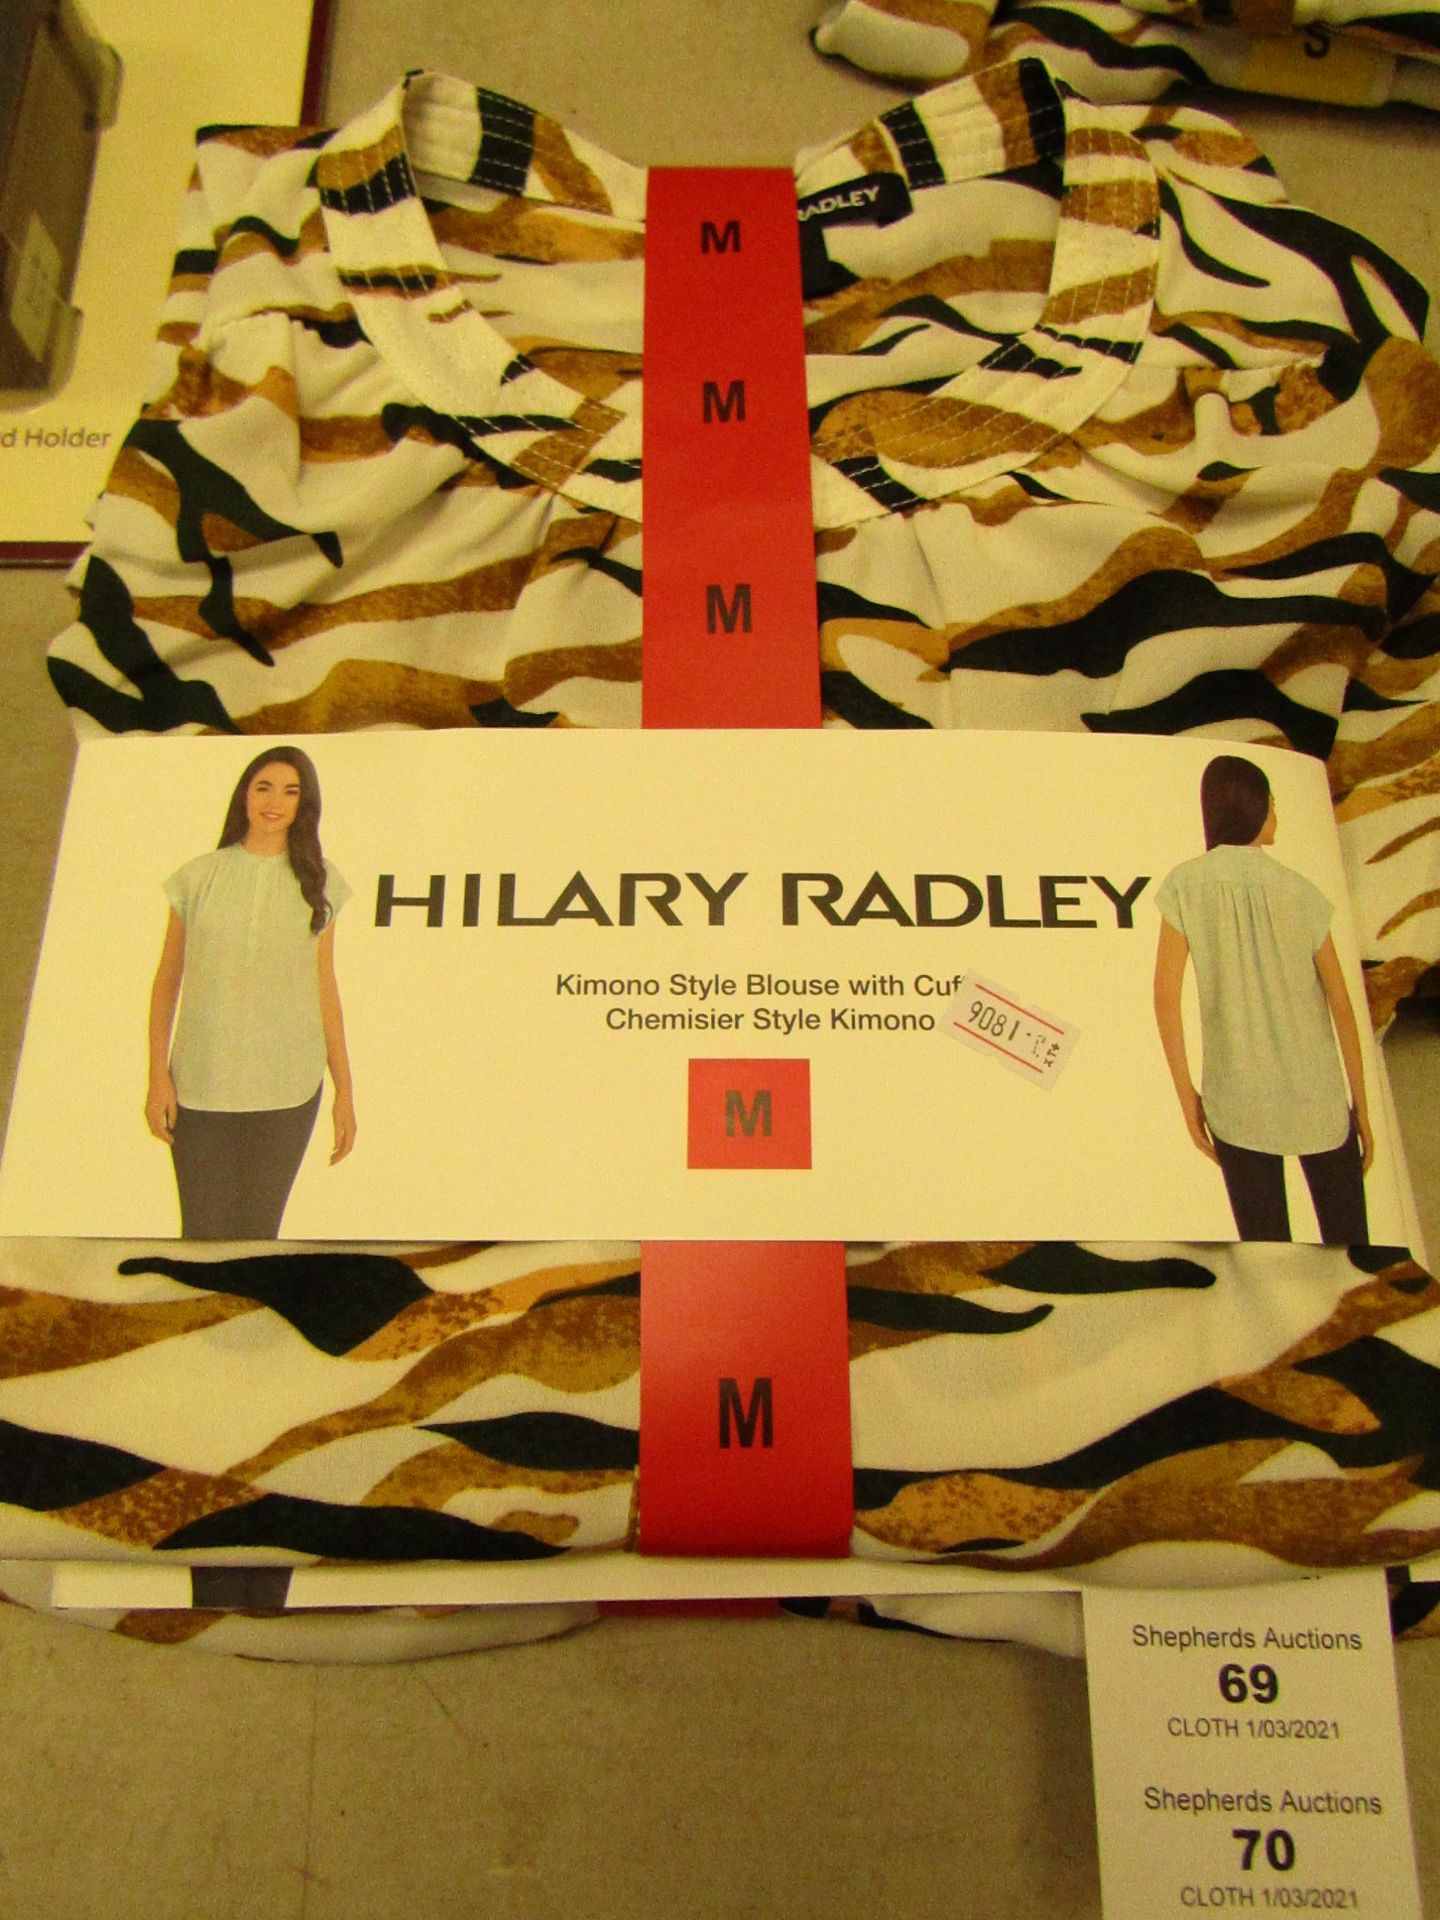 1 x Hilary Radley Kimono Style Blouse with Cuff Sleeve size M new & packaged see image for design